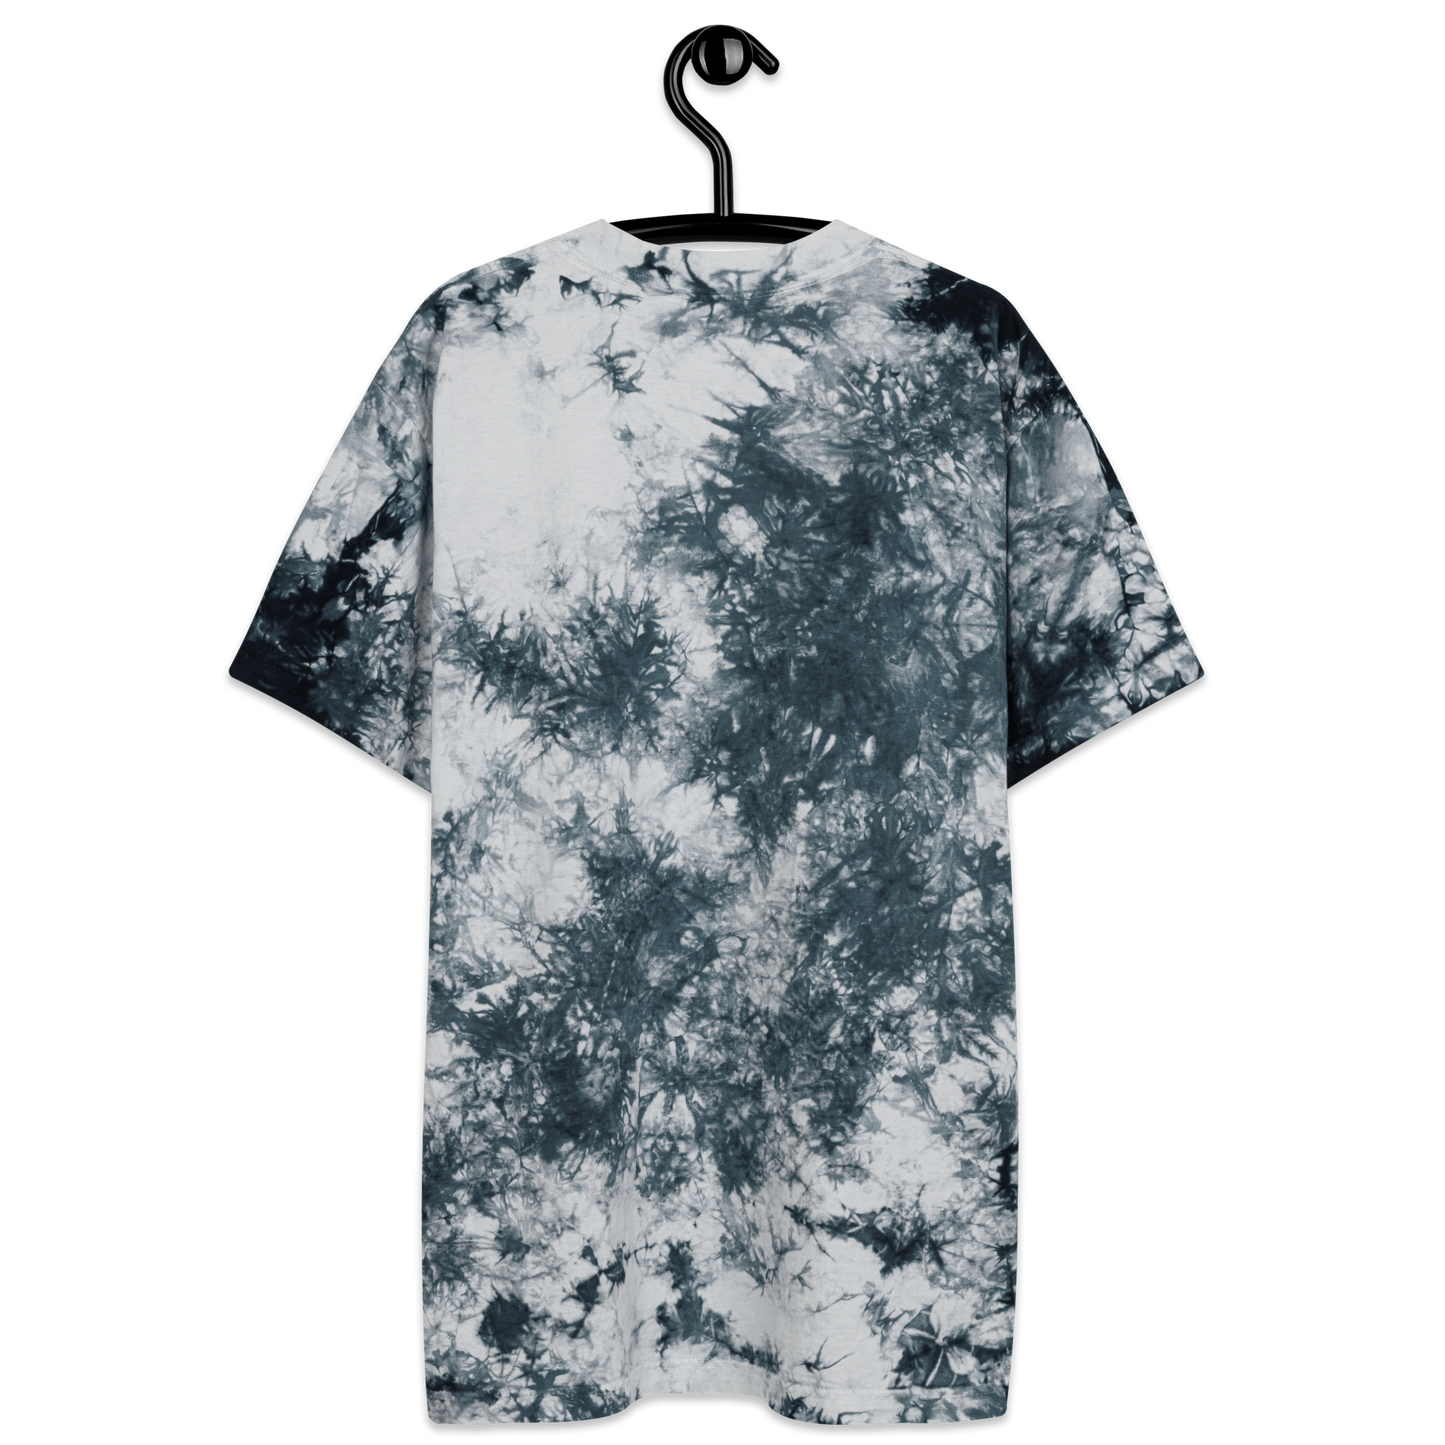 TIE DYE EMBROIDERED CHANGE TEE